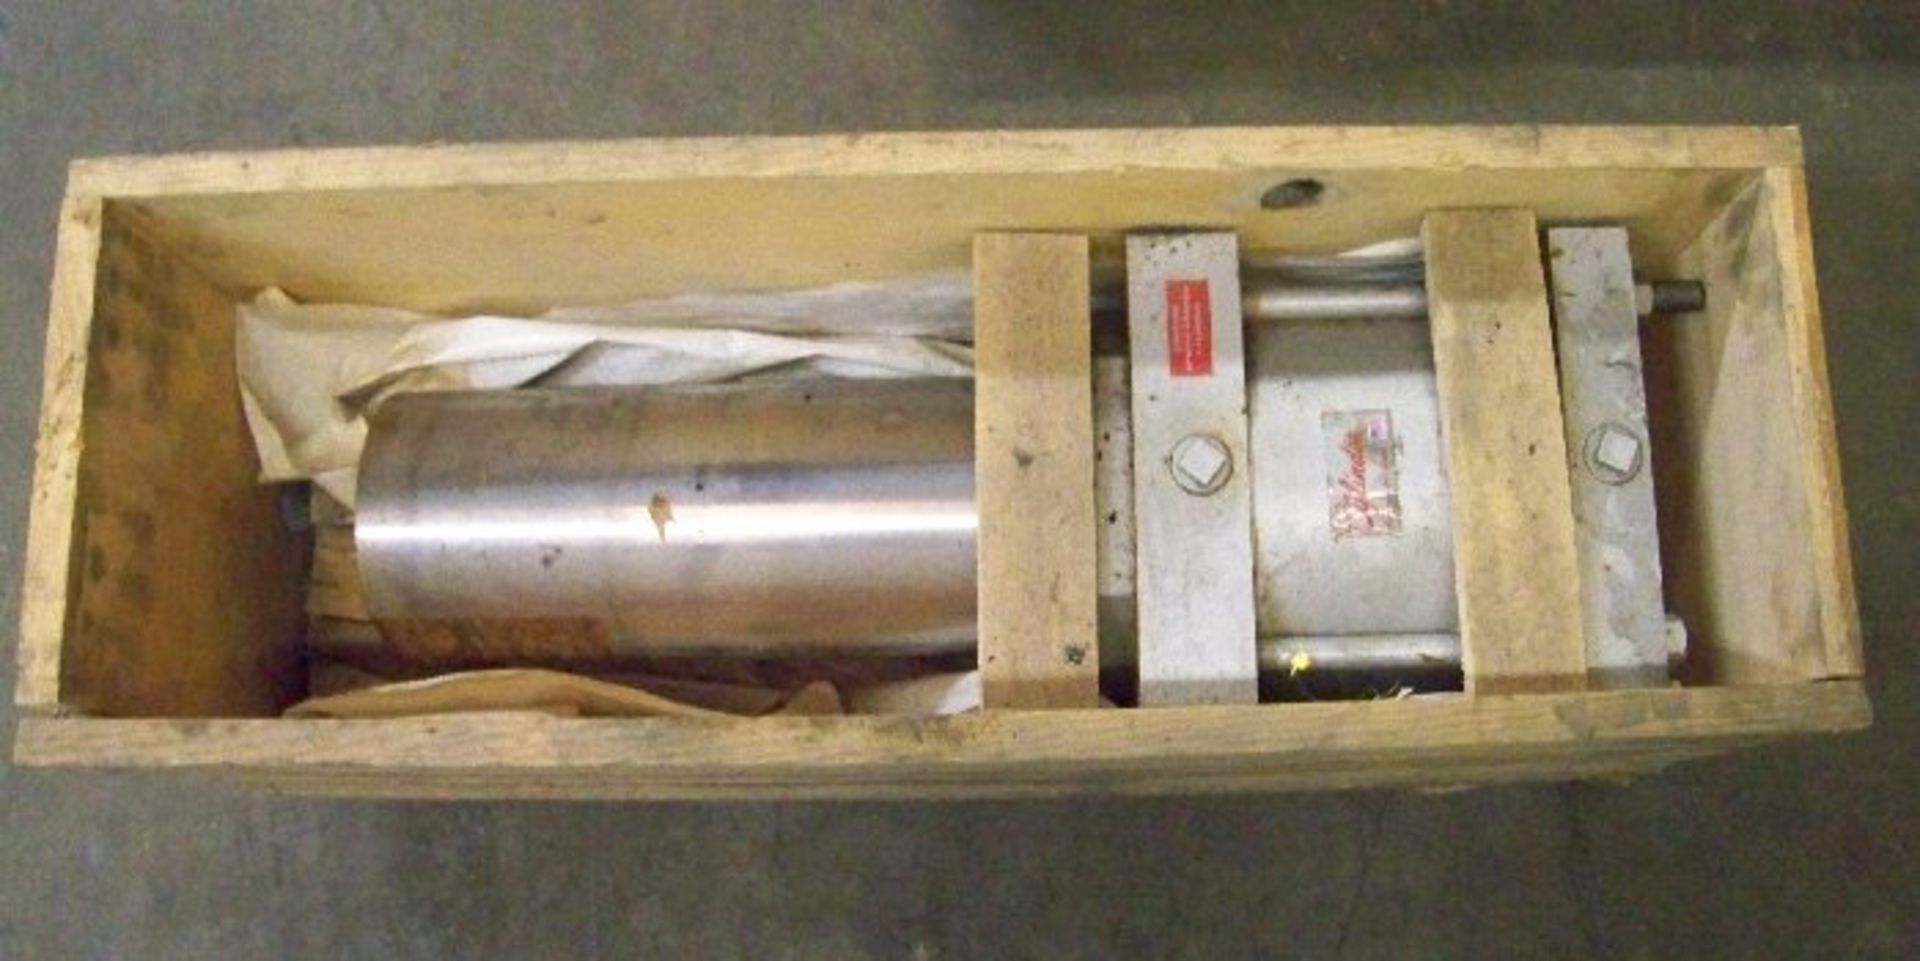 MILWAUKEE CYLINDER MDL C-7104 A21/SE, 8" BORE, 4" STROKE, 250 PSI SPRING LO9ADED